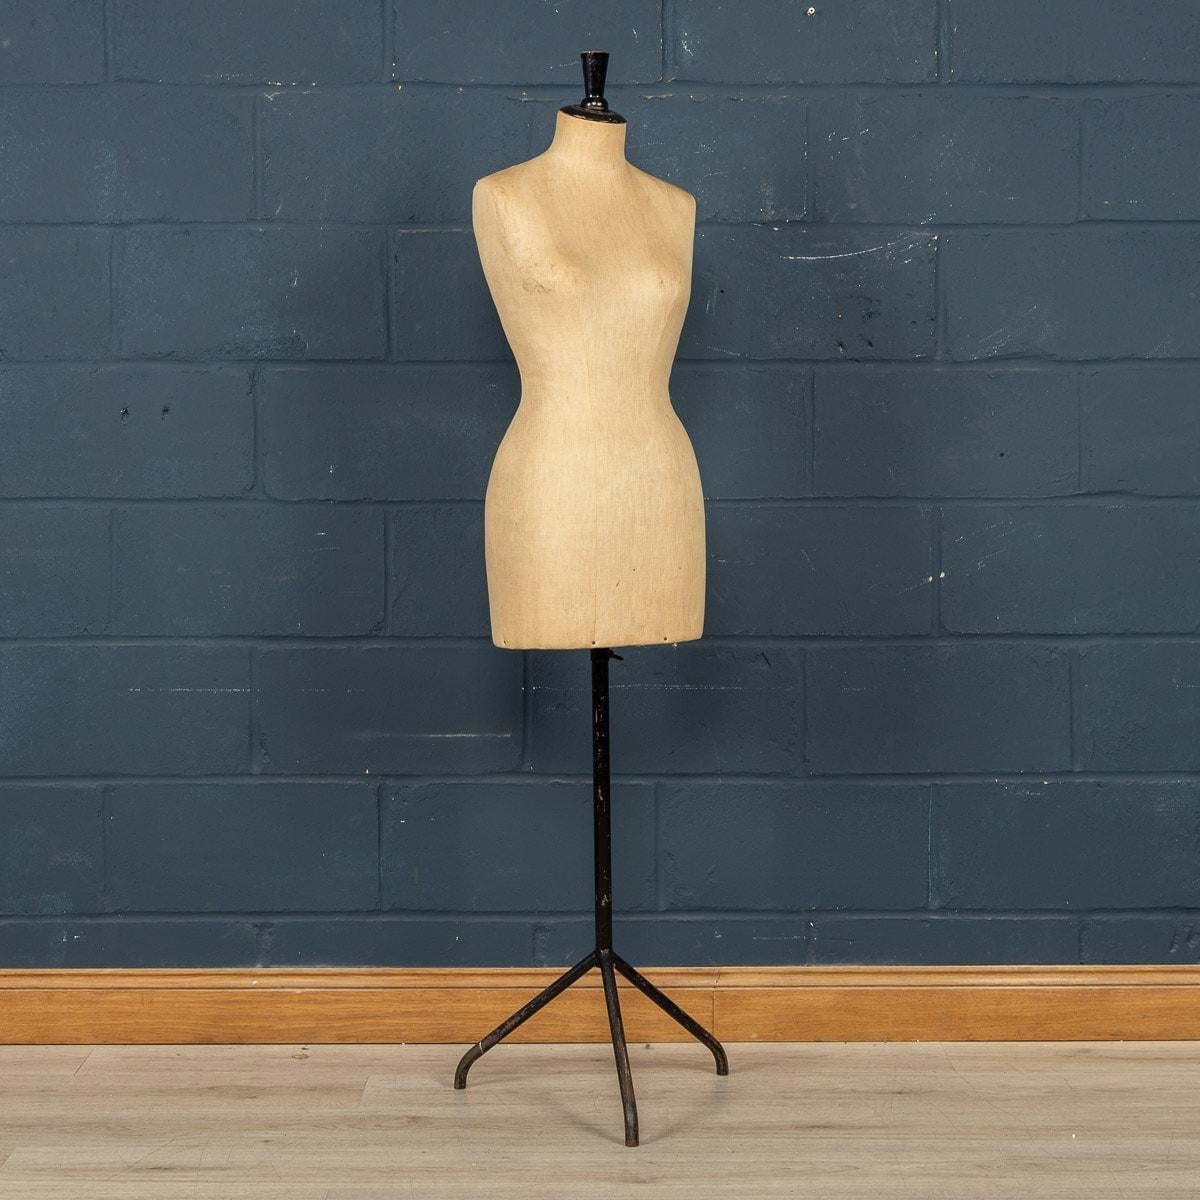 A lovely shop display mannequin dating to the early part of the last century. This quality vintage French mannequin or Taylor's dummy dates from around the 1910s era and has a black steel base. The neck retains its original finial and the fabric is